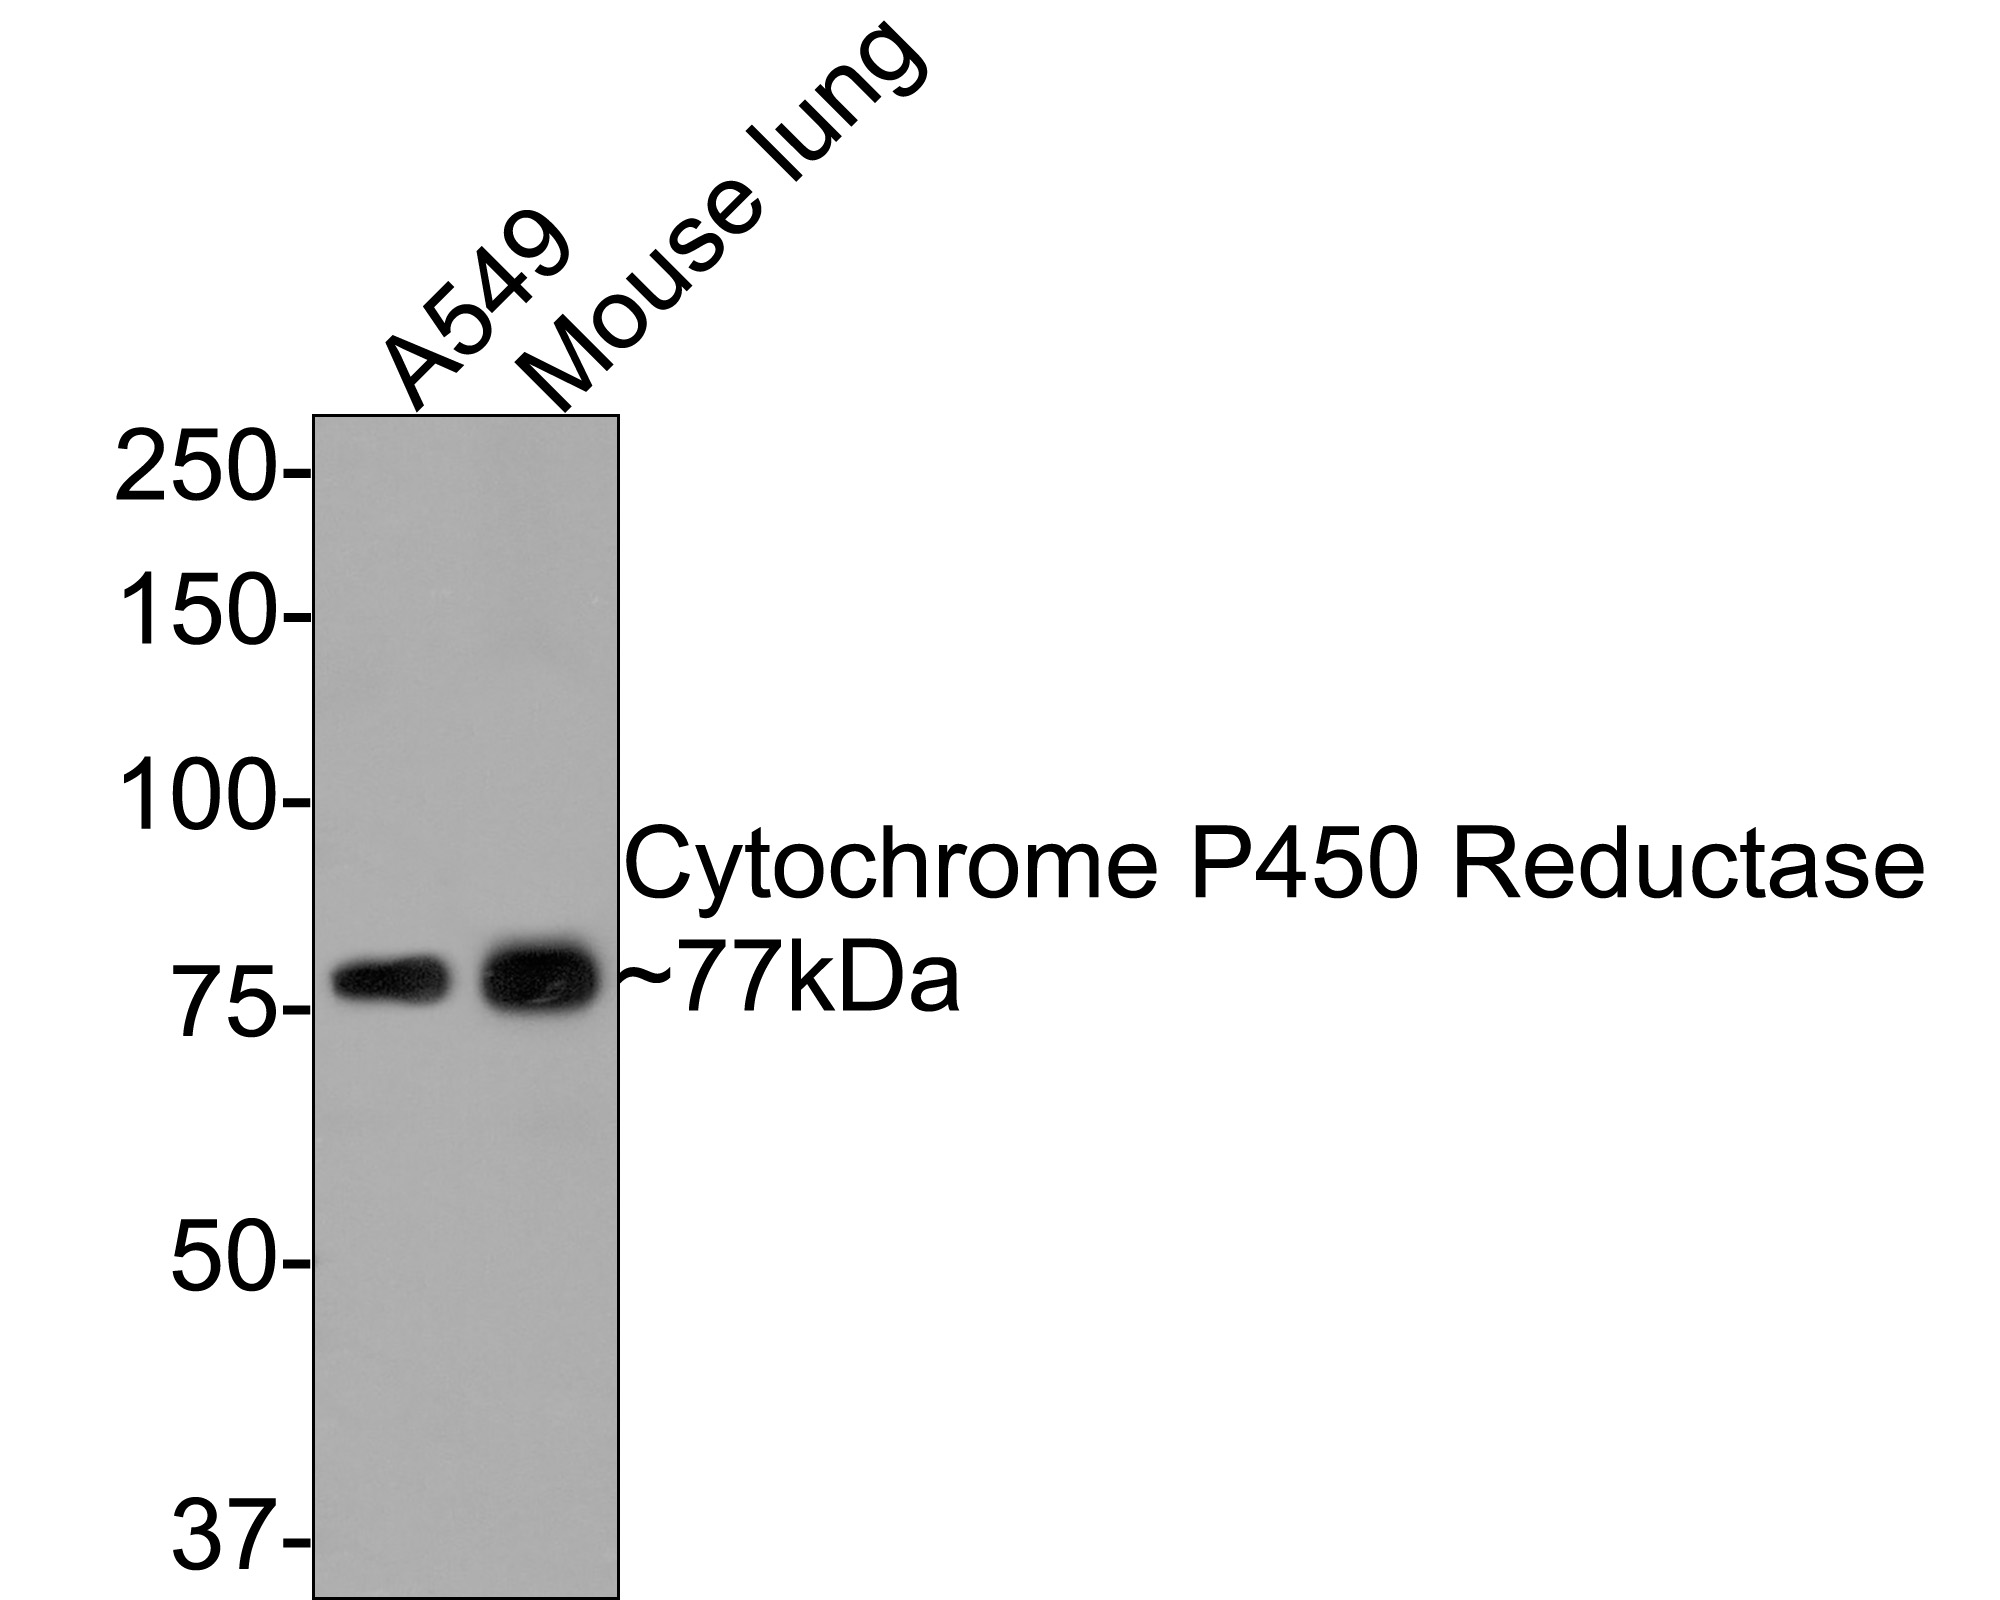 Western blot analysis of Cytochrome P450 Reductase on different lysates with Rabbit anti-Cytochrome P450 Reductase antibody (ET7107-35) at 1/500 dilution.<br />
<br />
Lane 1: A549 cell lysate (10 µg/Lane)<br />
Lane 2: Mouse lung tissue lysate (20 µg/Lane)<br />
<br />
Predicted band size: 77 kDa<br />
Observed band size: 77 kDa<br />
<br />
Exposure time: 2 minutes;<br />
<br />
8% SDS-PAGE gel.<br />
<br />
Proteins were transferred to a PVDF membrane and blocked with 5% NFDM/TBST for 1 hour at room temperature. The primary antibody (ET7107-35) at 1/500 dilution was used in 5% NFDM/TBST at room temperature for 2 hours. Goat Anti-Rabbit IgG - HRP Secondary Antibody (HA1001) at 1:300,000 dilution was used for 1 hour at room temperature.